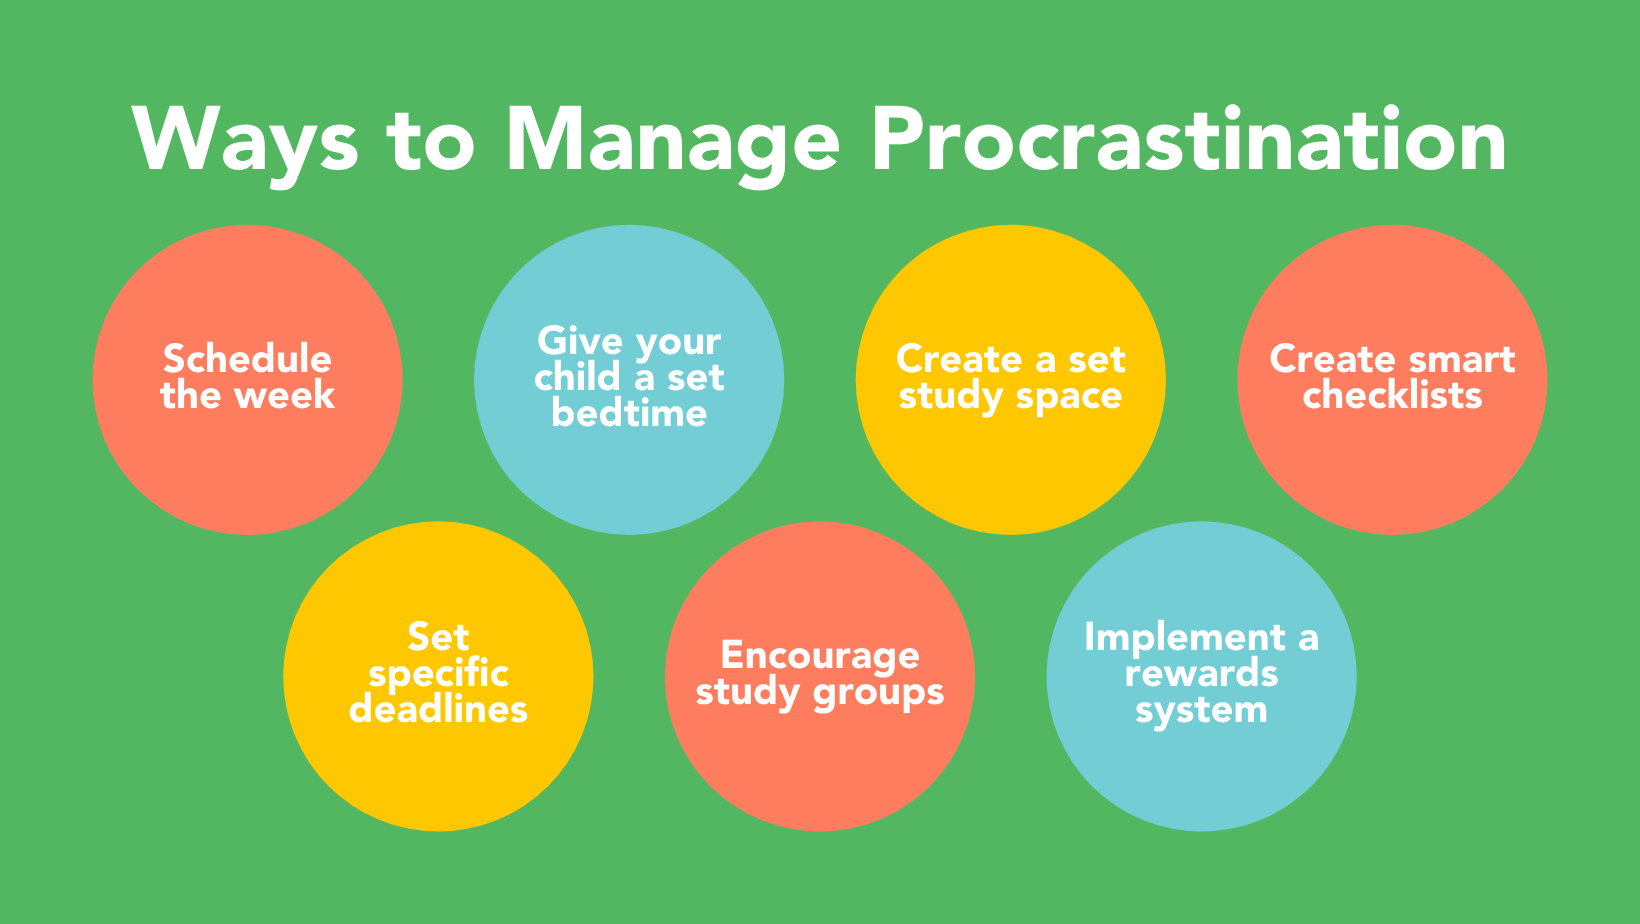 How to Stop Procrastinating and Start Studying - Tips